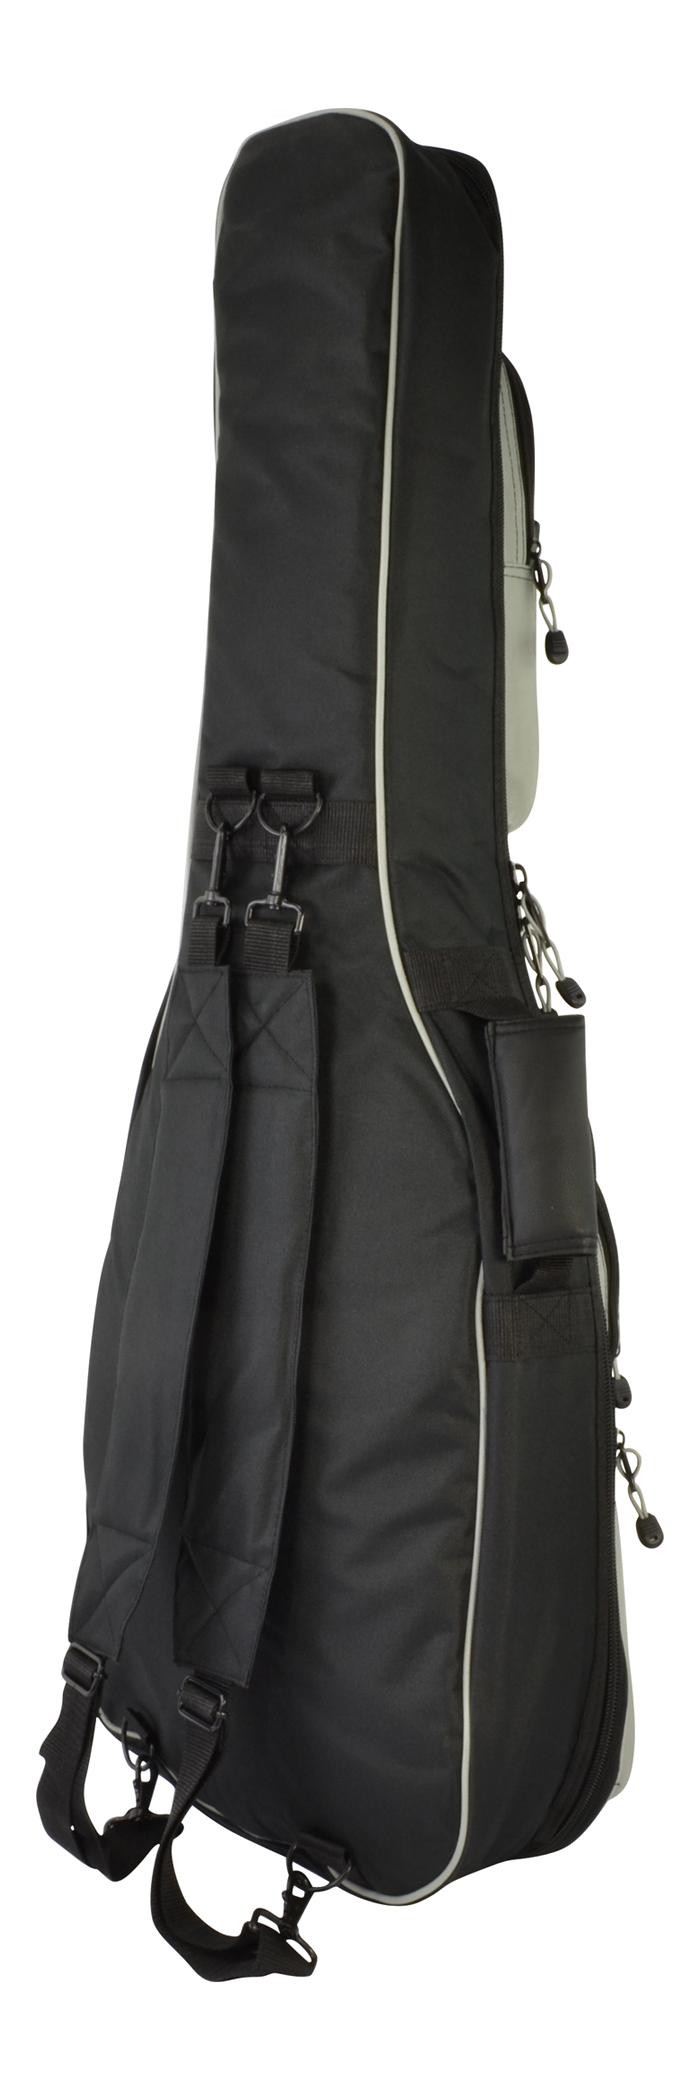 Deluxe Electric Padded Guitar Bag by Cobra